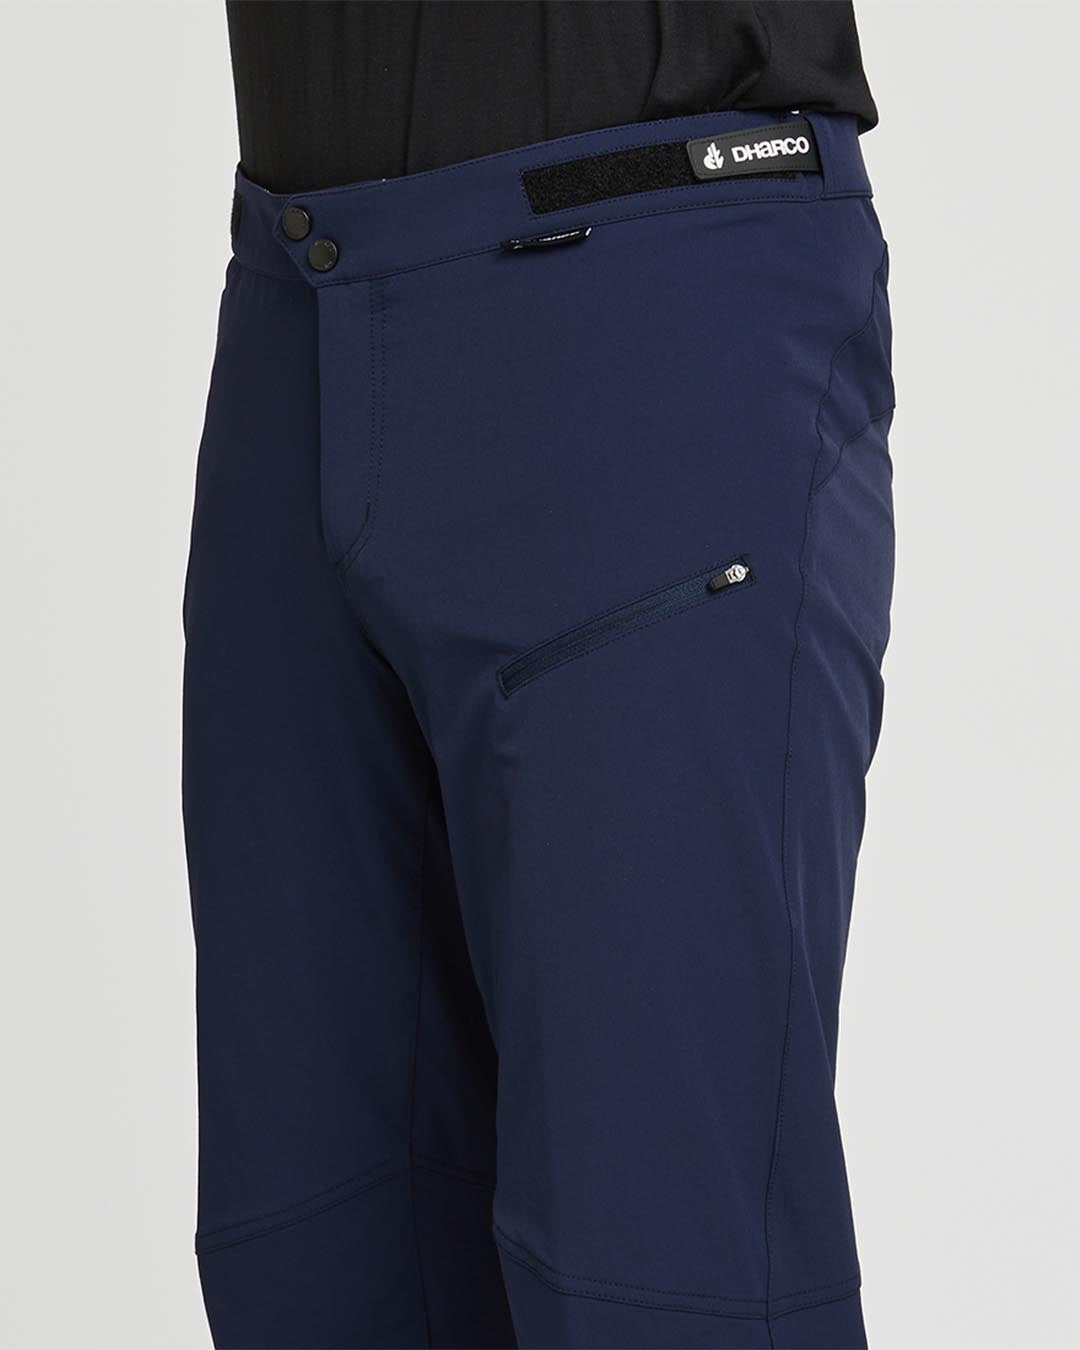 Specialized Gravity Pant Pant – Rock N' Road